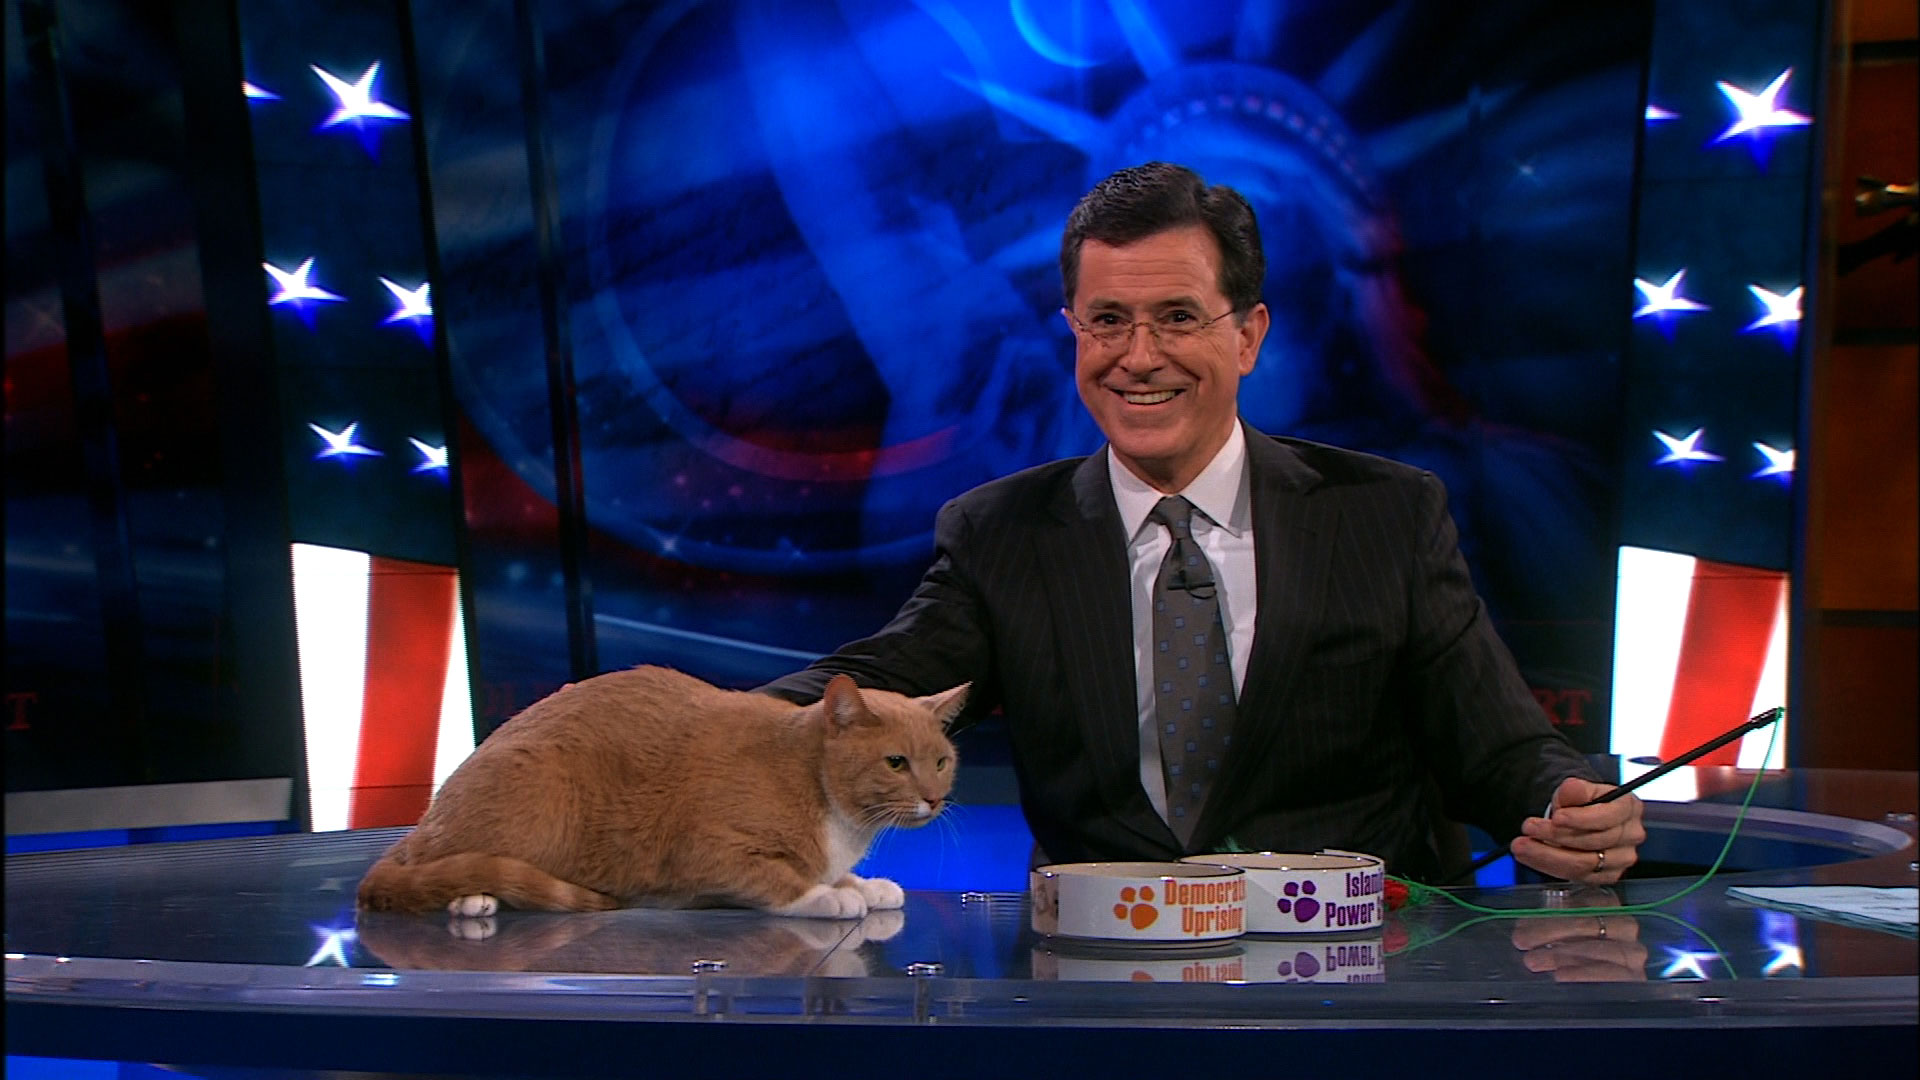 Amazing The Colbert Report Pictures & Backgrounds